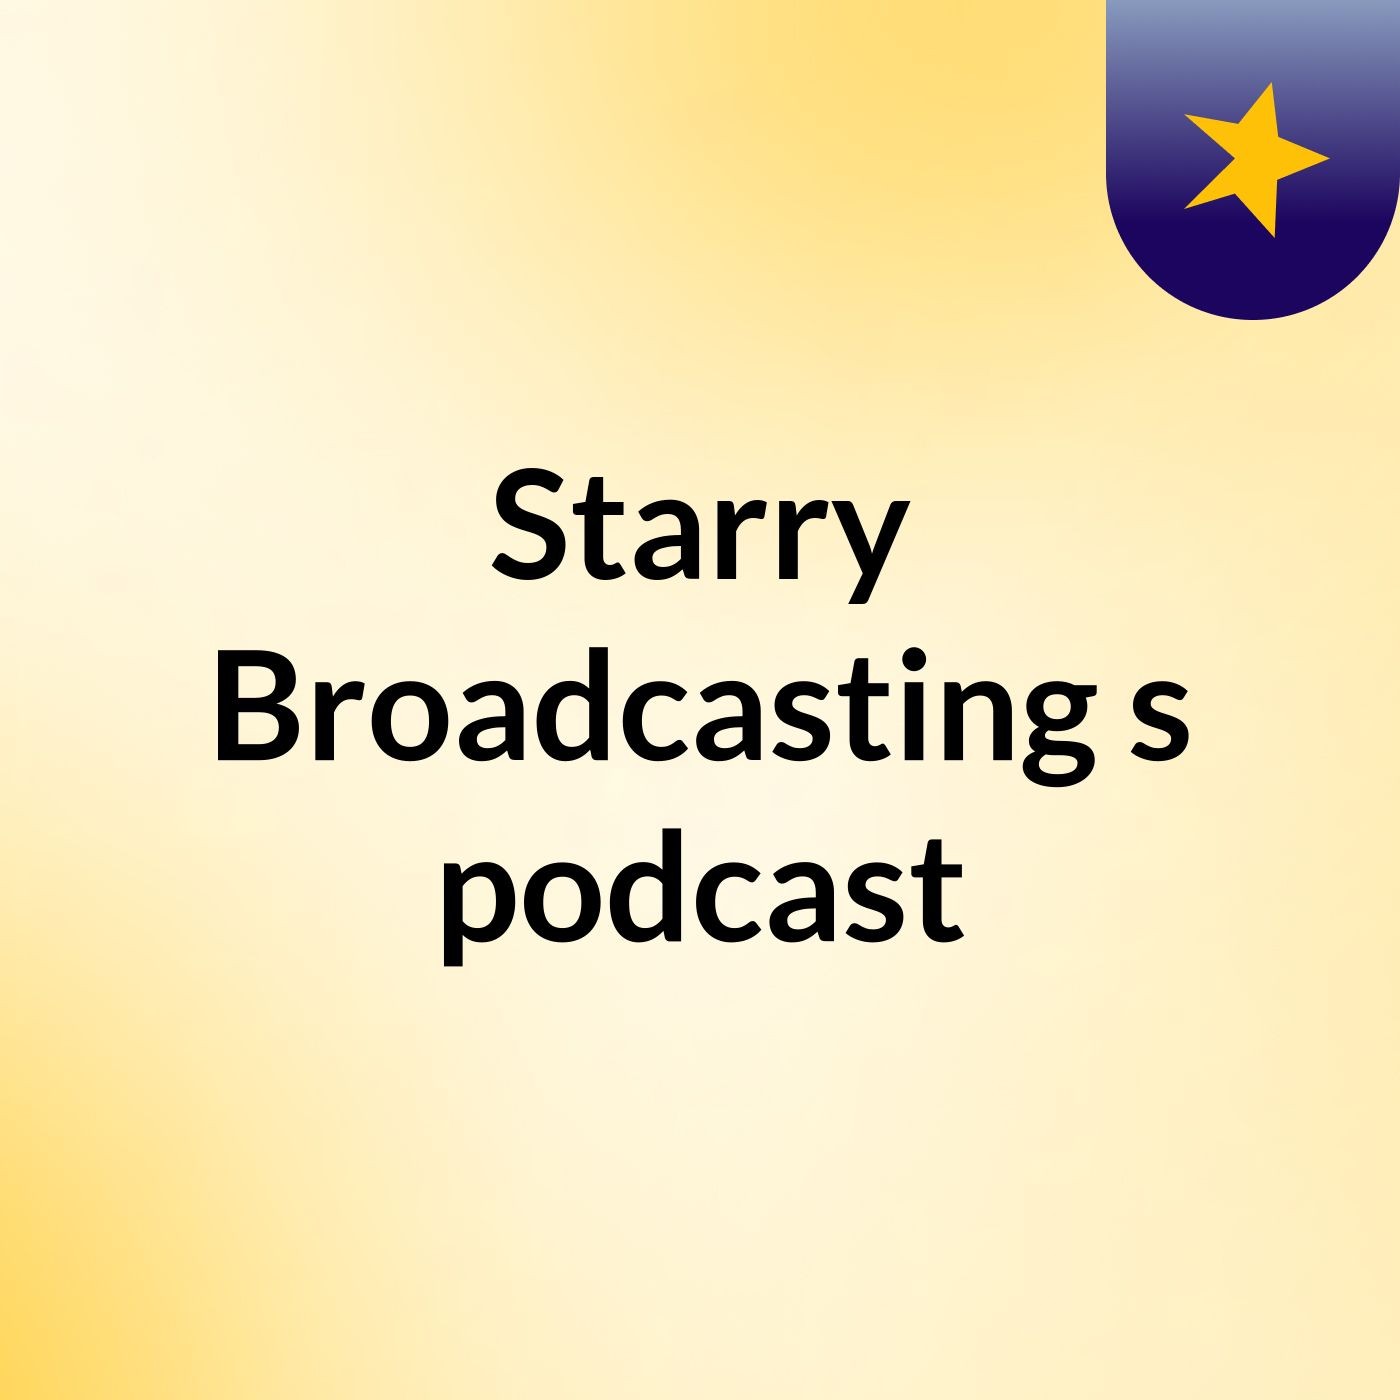 Episode 3 - Starry Broadcasting's podcast